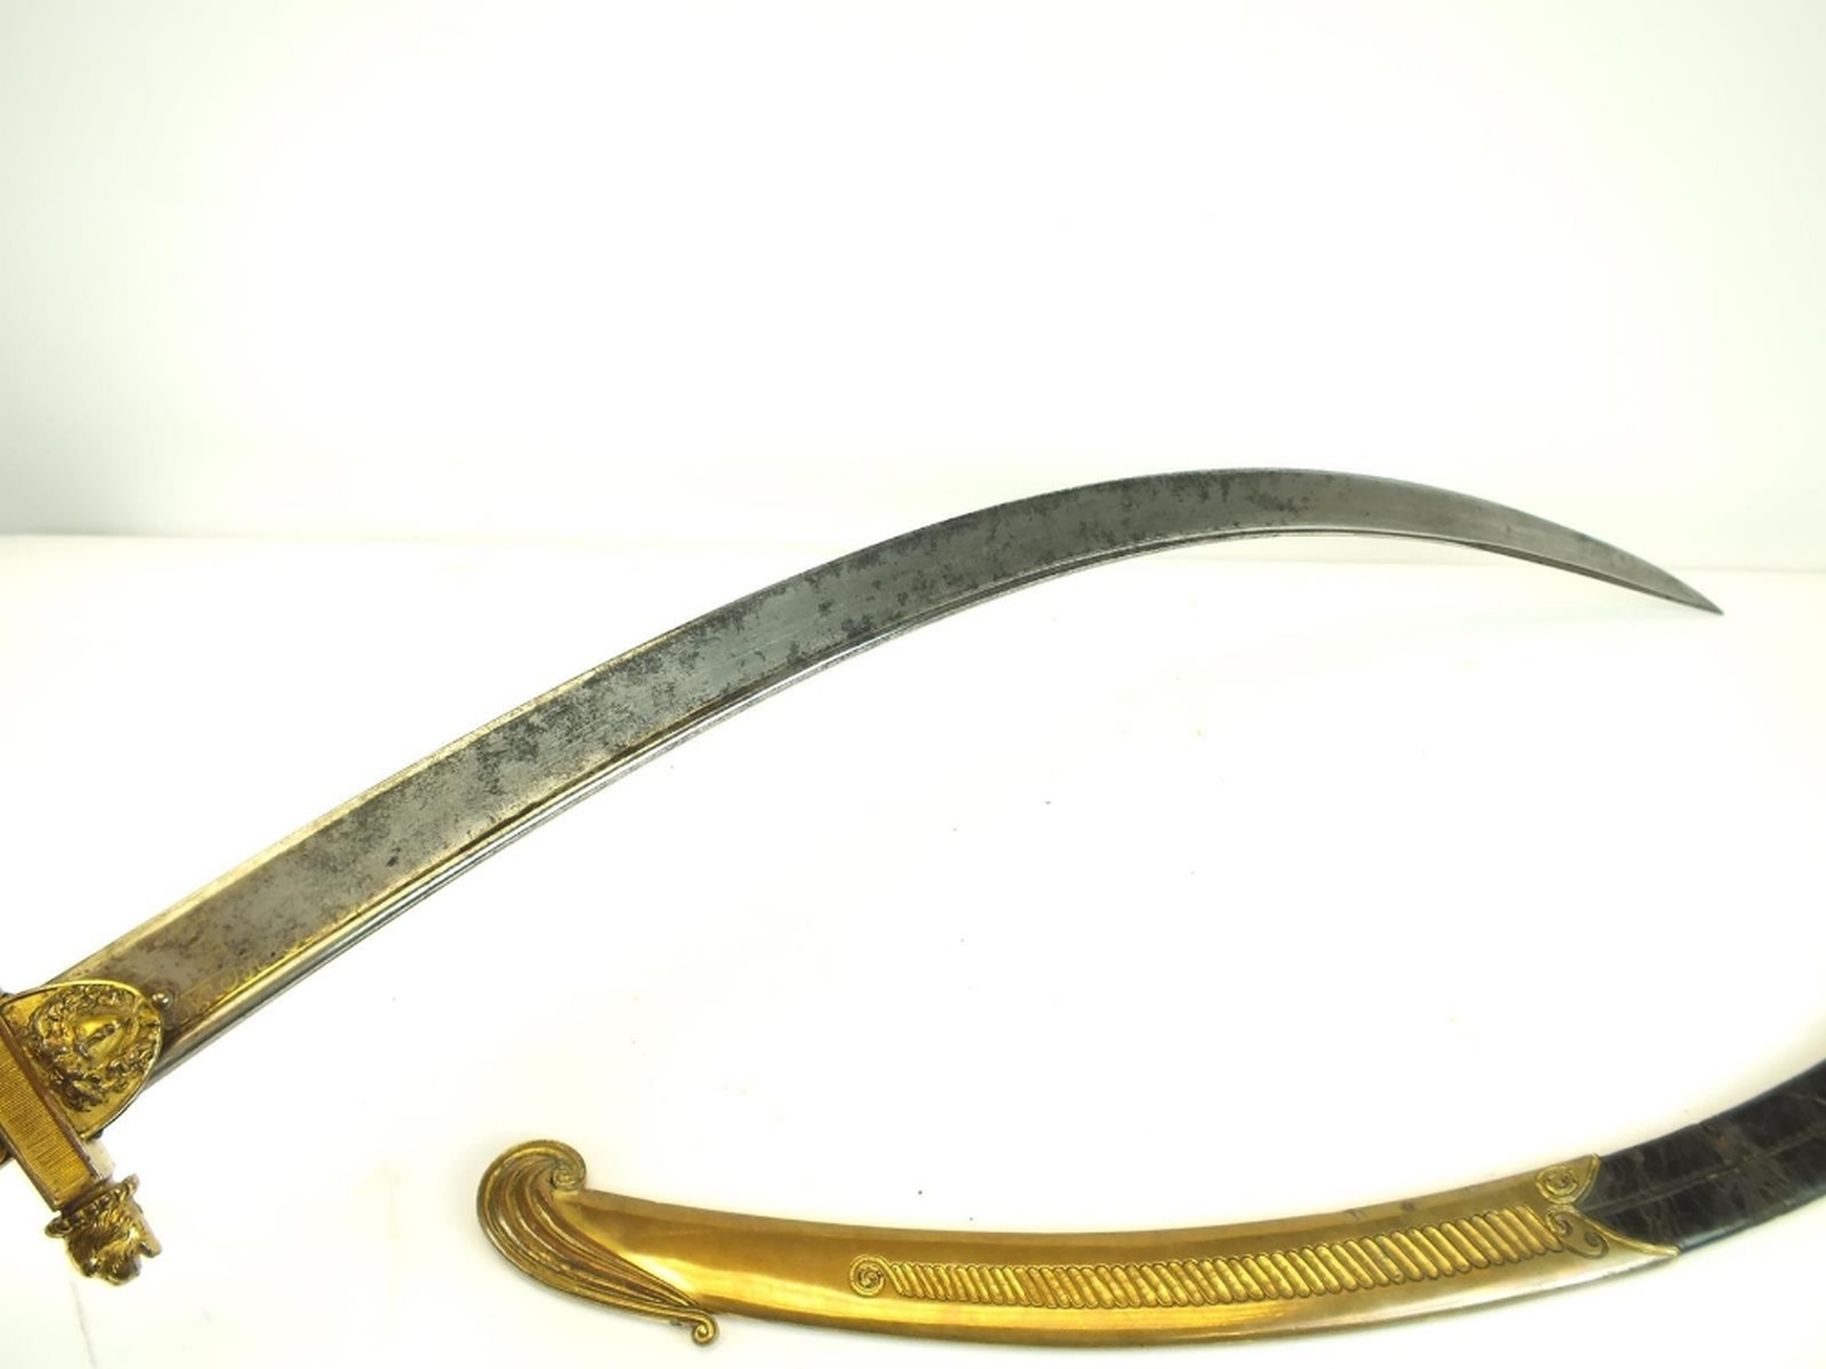 A LATE 18TH OR EARLY 19TH CENTURY PRESENTATION QUALITY SABRE BY PROSSER, 83cm sharply curved pipe- - Image 14 of 18